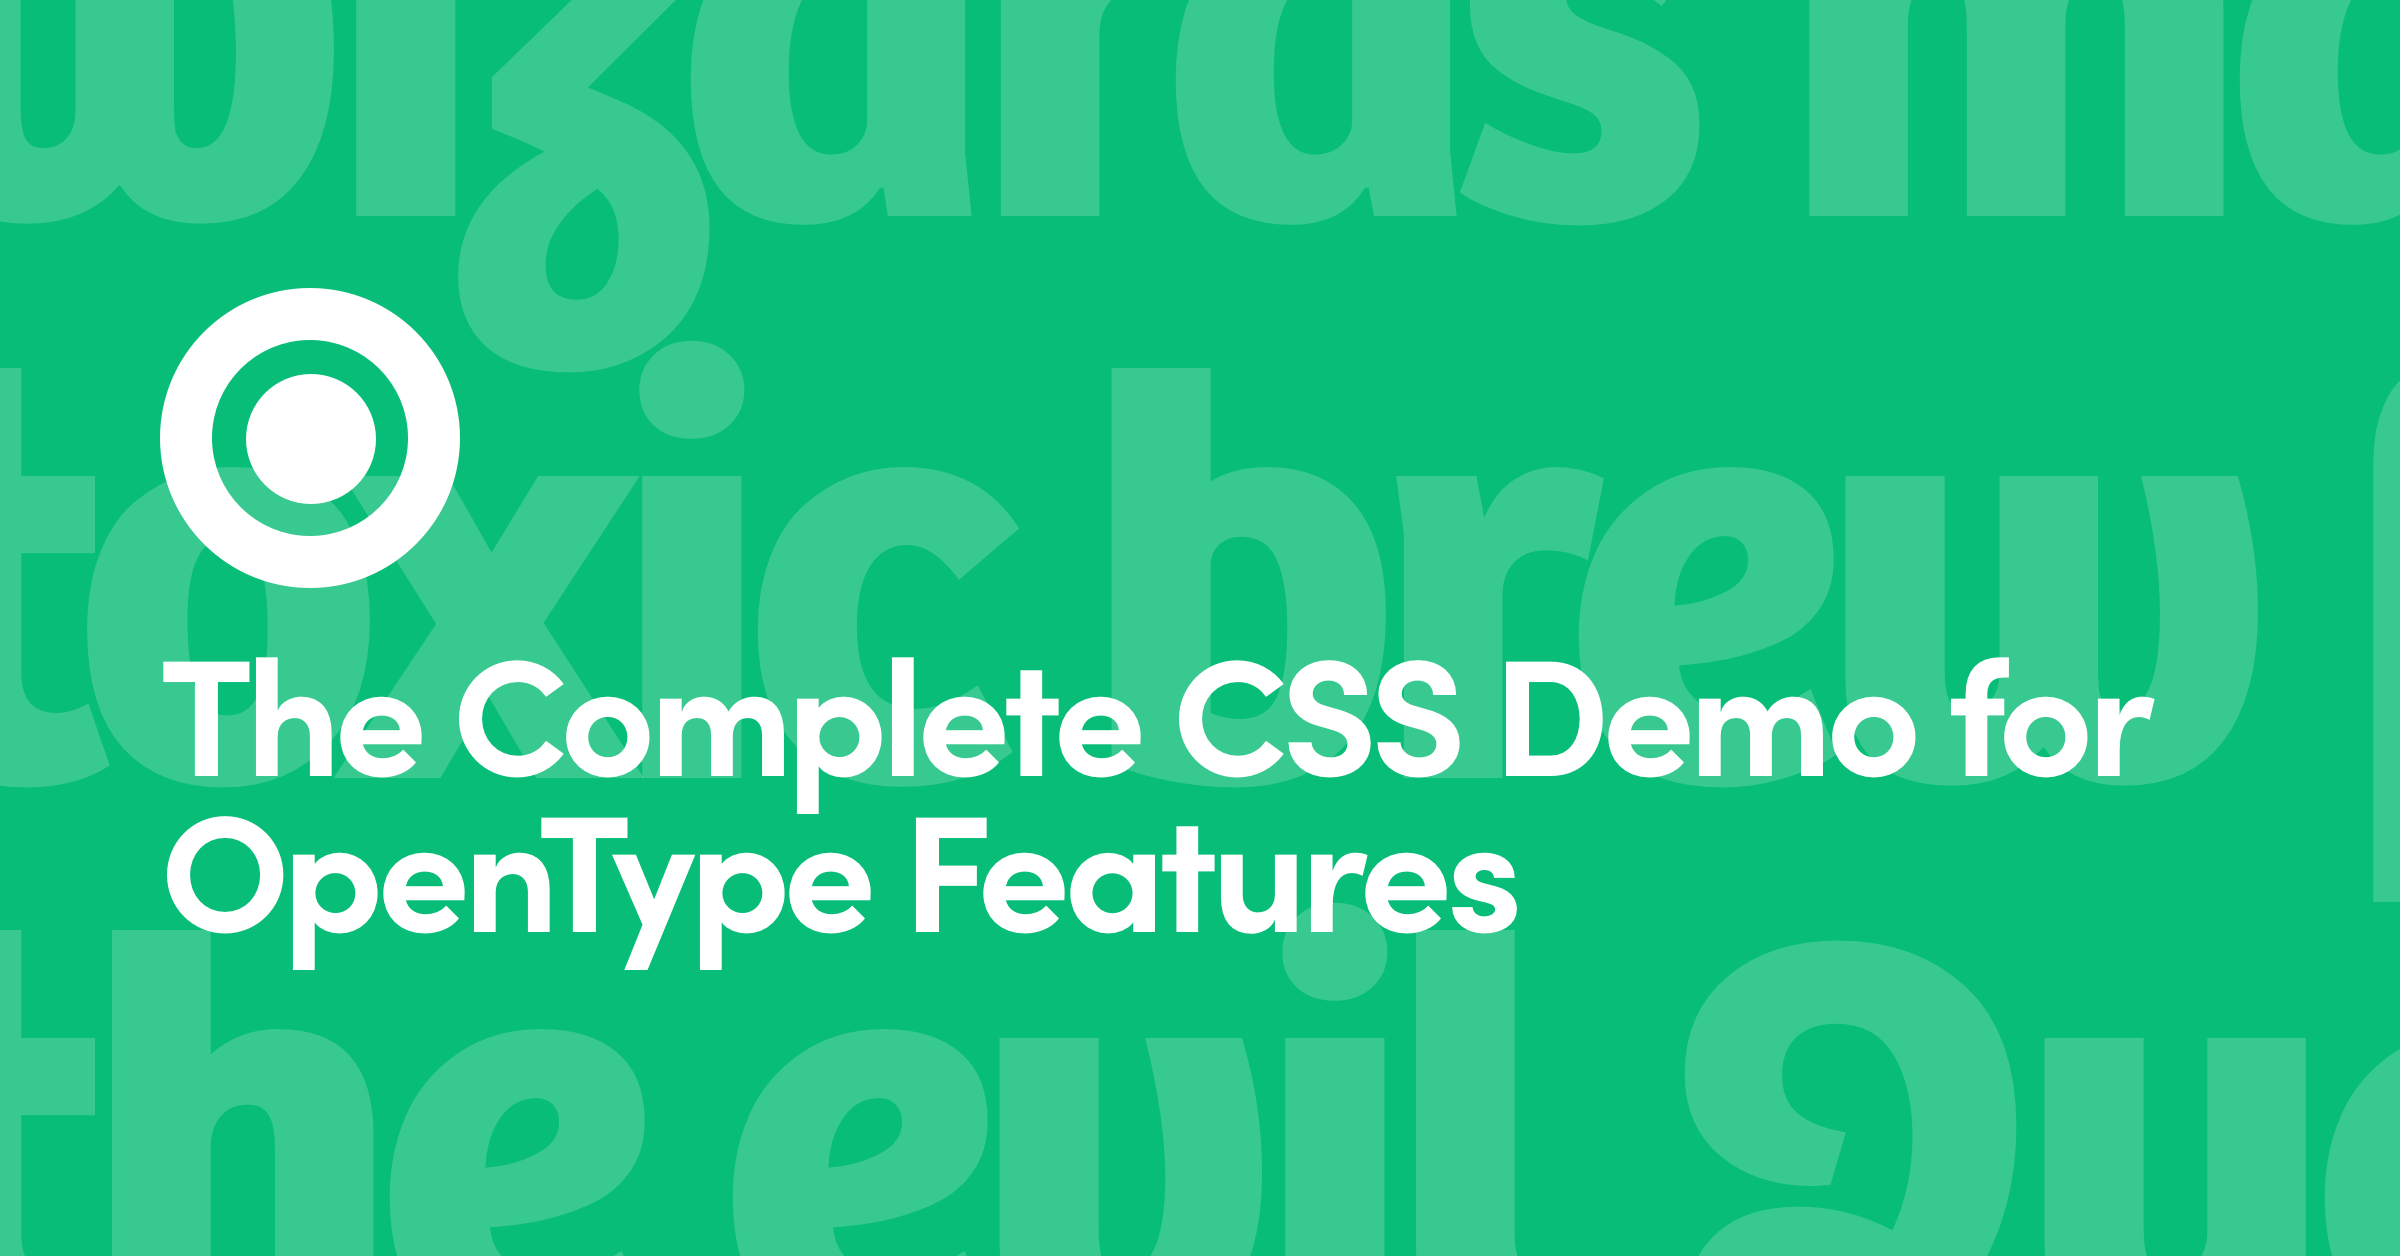 The Complete CSS Demo for OpenType Features - OpenType Features in CSS